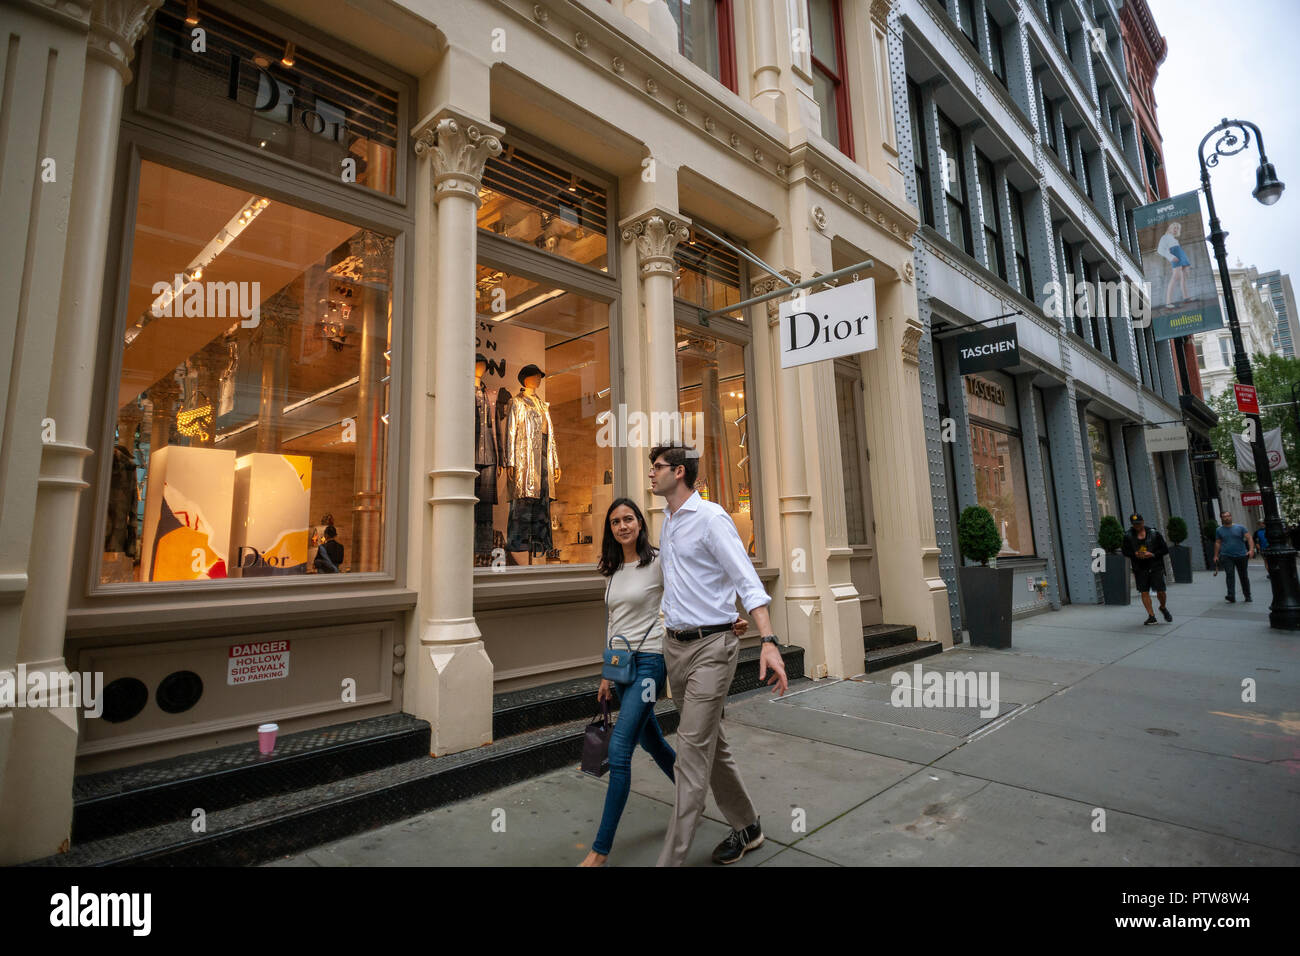 The Dior store in the Soho neighborhood of New York on Monday, October 8, 2018. Dior is a brand of the luxury conglomerate LVMH. (Â© Richard B. Levine) Stock Photo